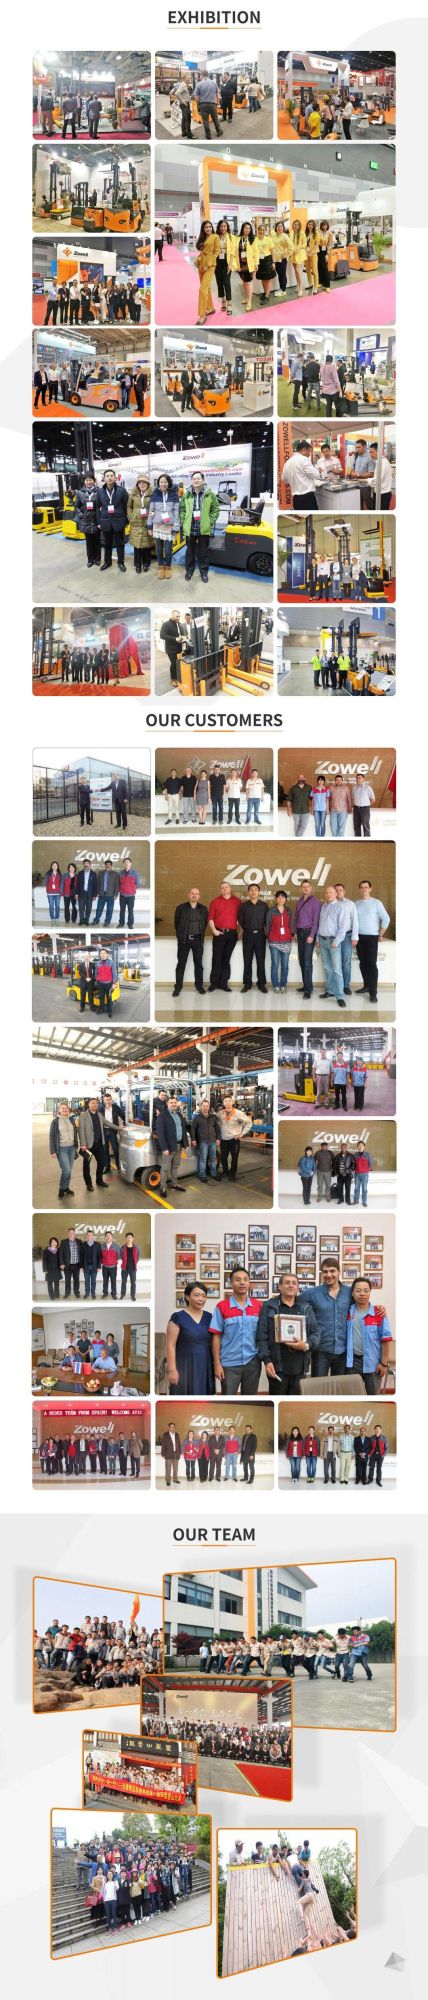 Pneumatic/Air/Non-Marking Zowell Wooden Pallet 3540*1265mm Suzhou, China Forklift Electric Lift Truck